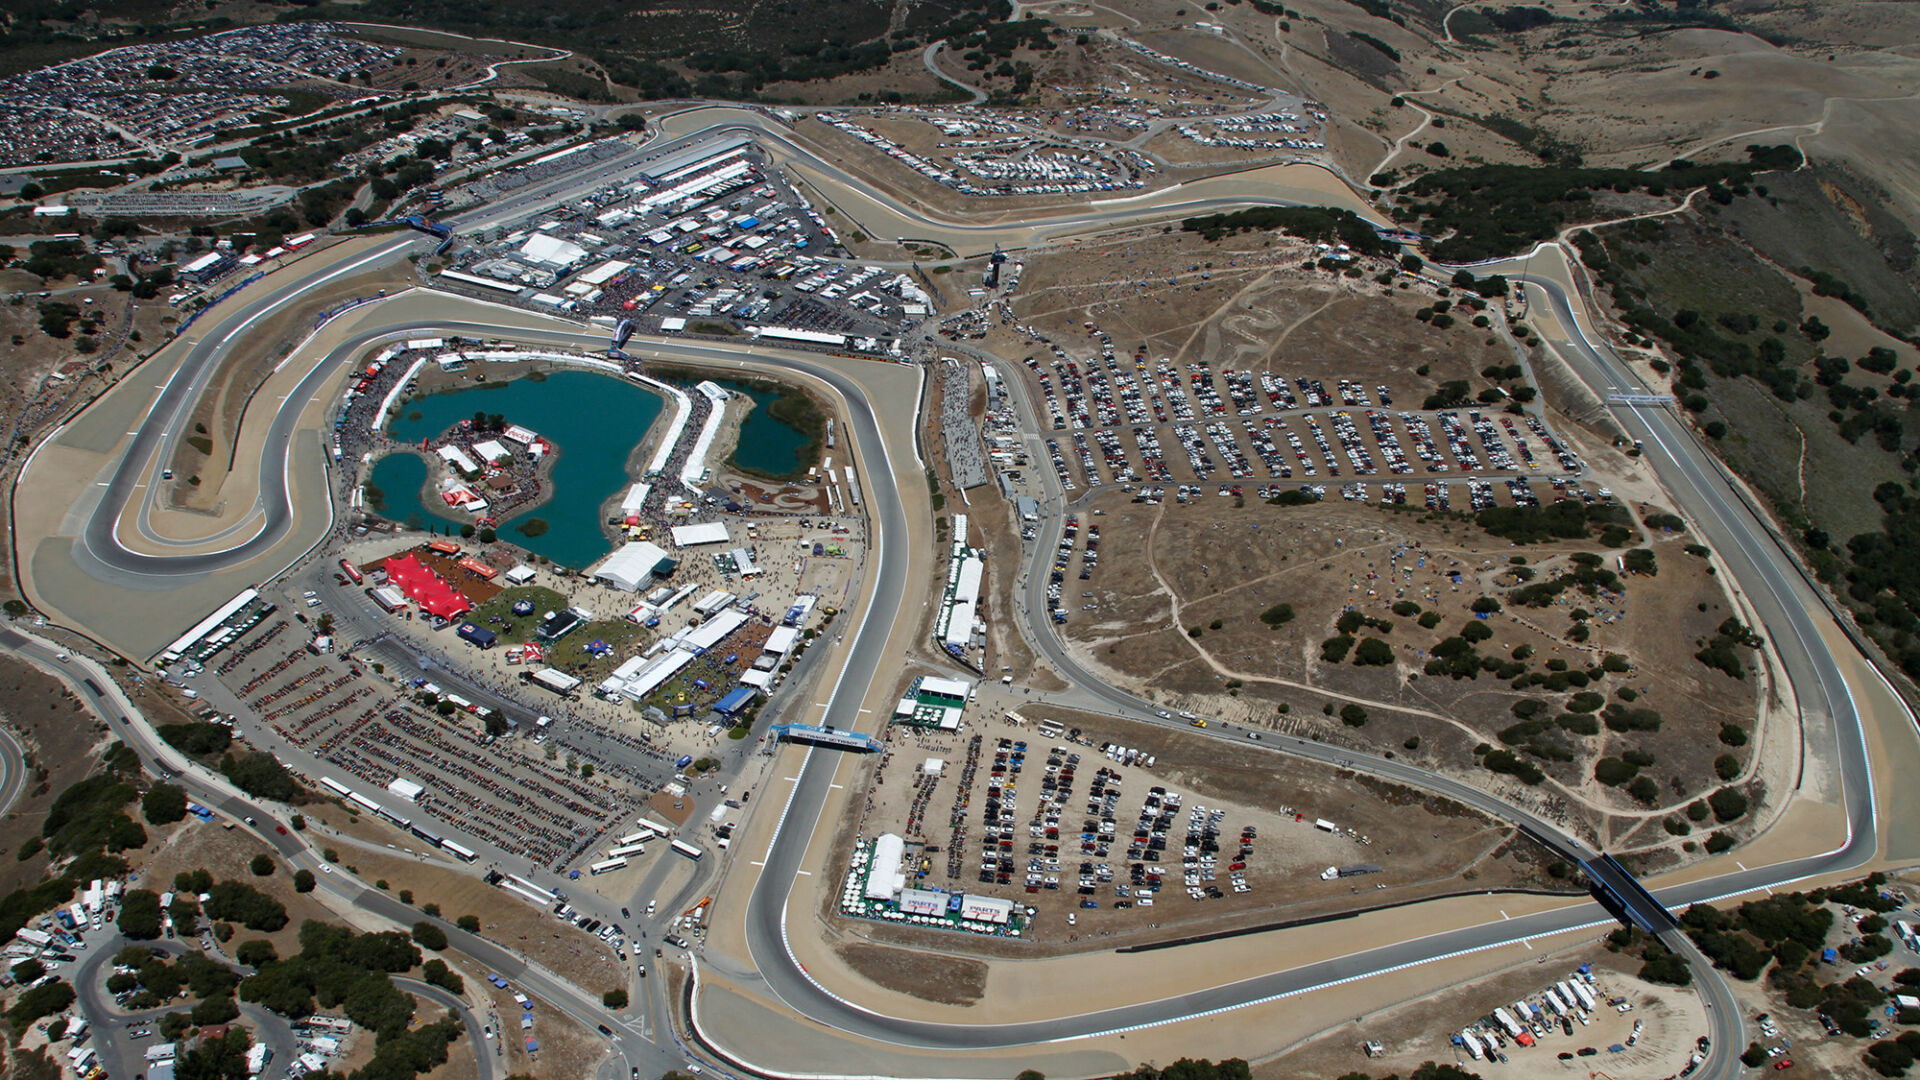 WeatherTech Raceway Laguna Seca with Turn Five located at the bottom center of the frame. Photo courtesy WeatherTech Raceway Laguna Seca.